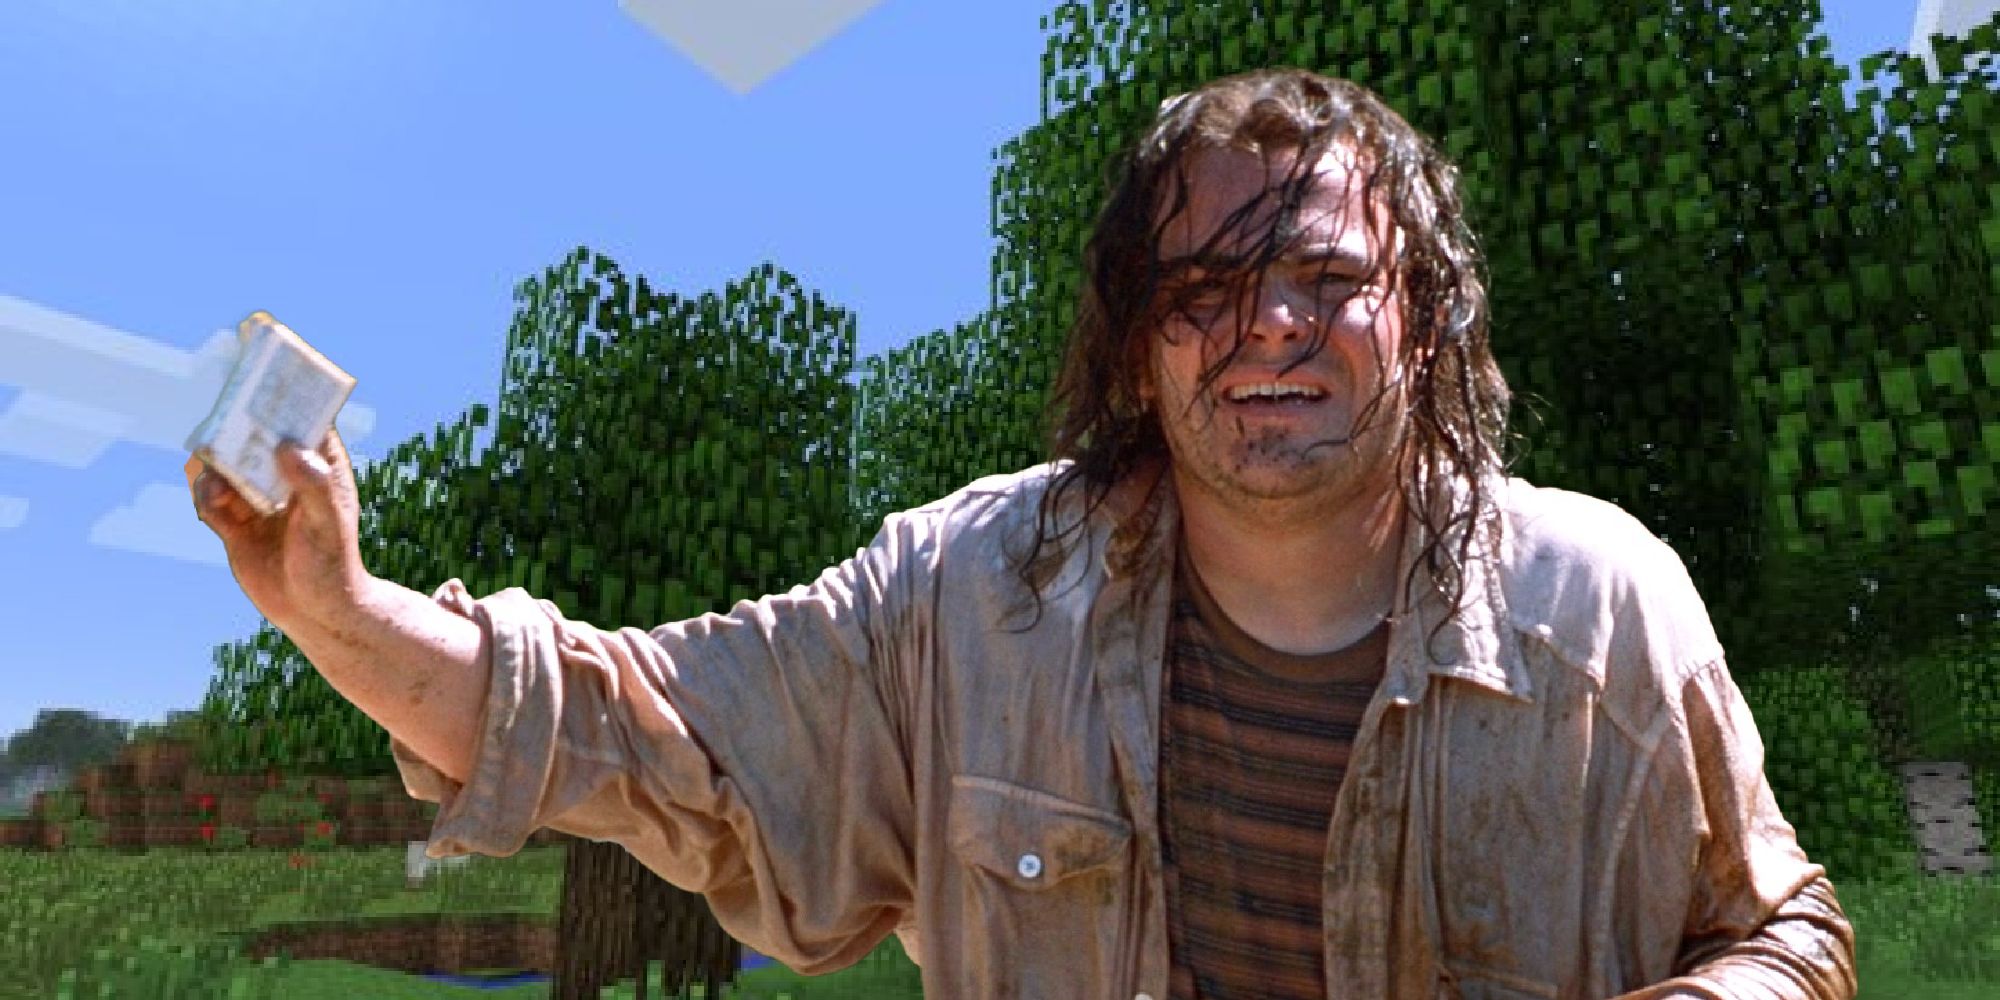 Jack Black covered in dirt with ragged sweaty hair inside of Minecraft, standing in front of a forest